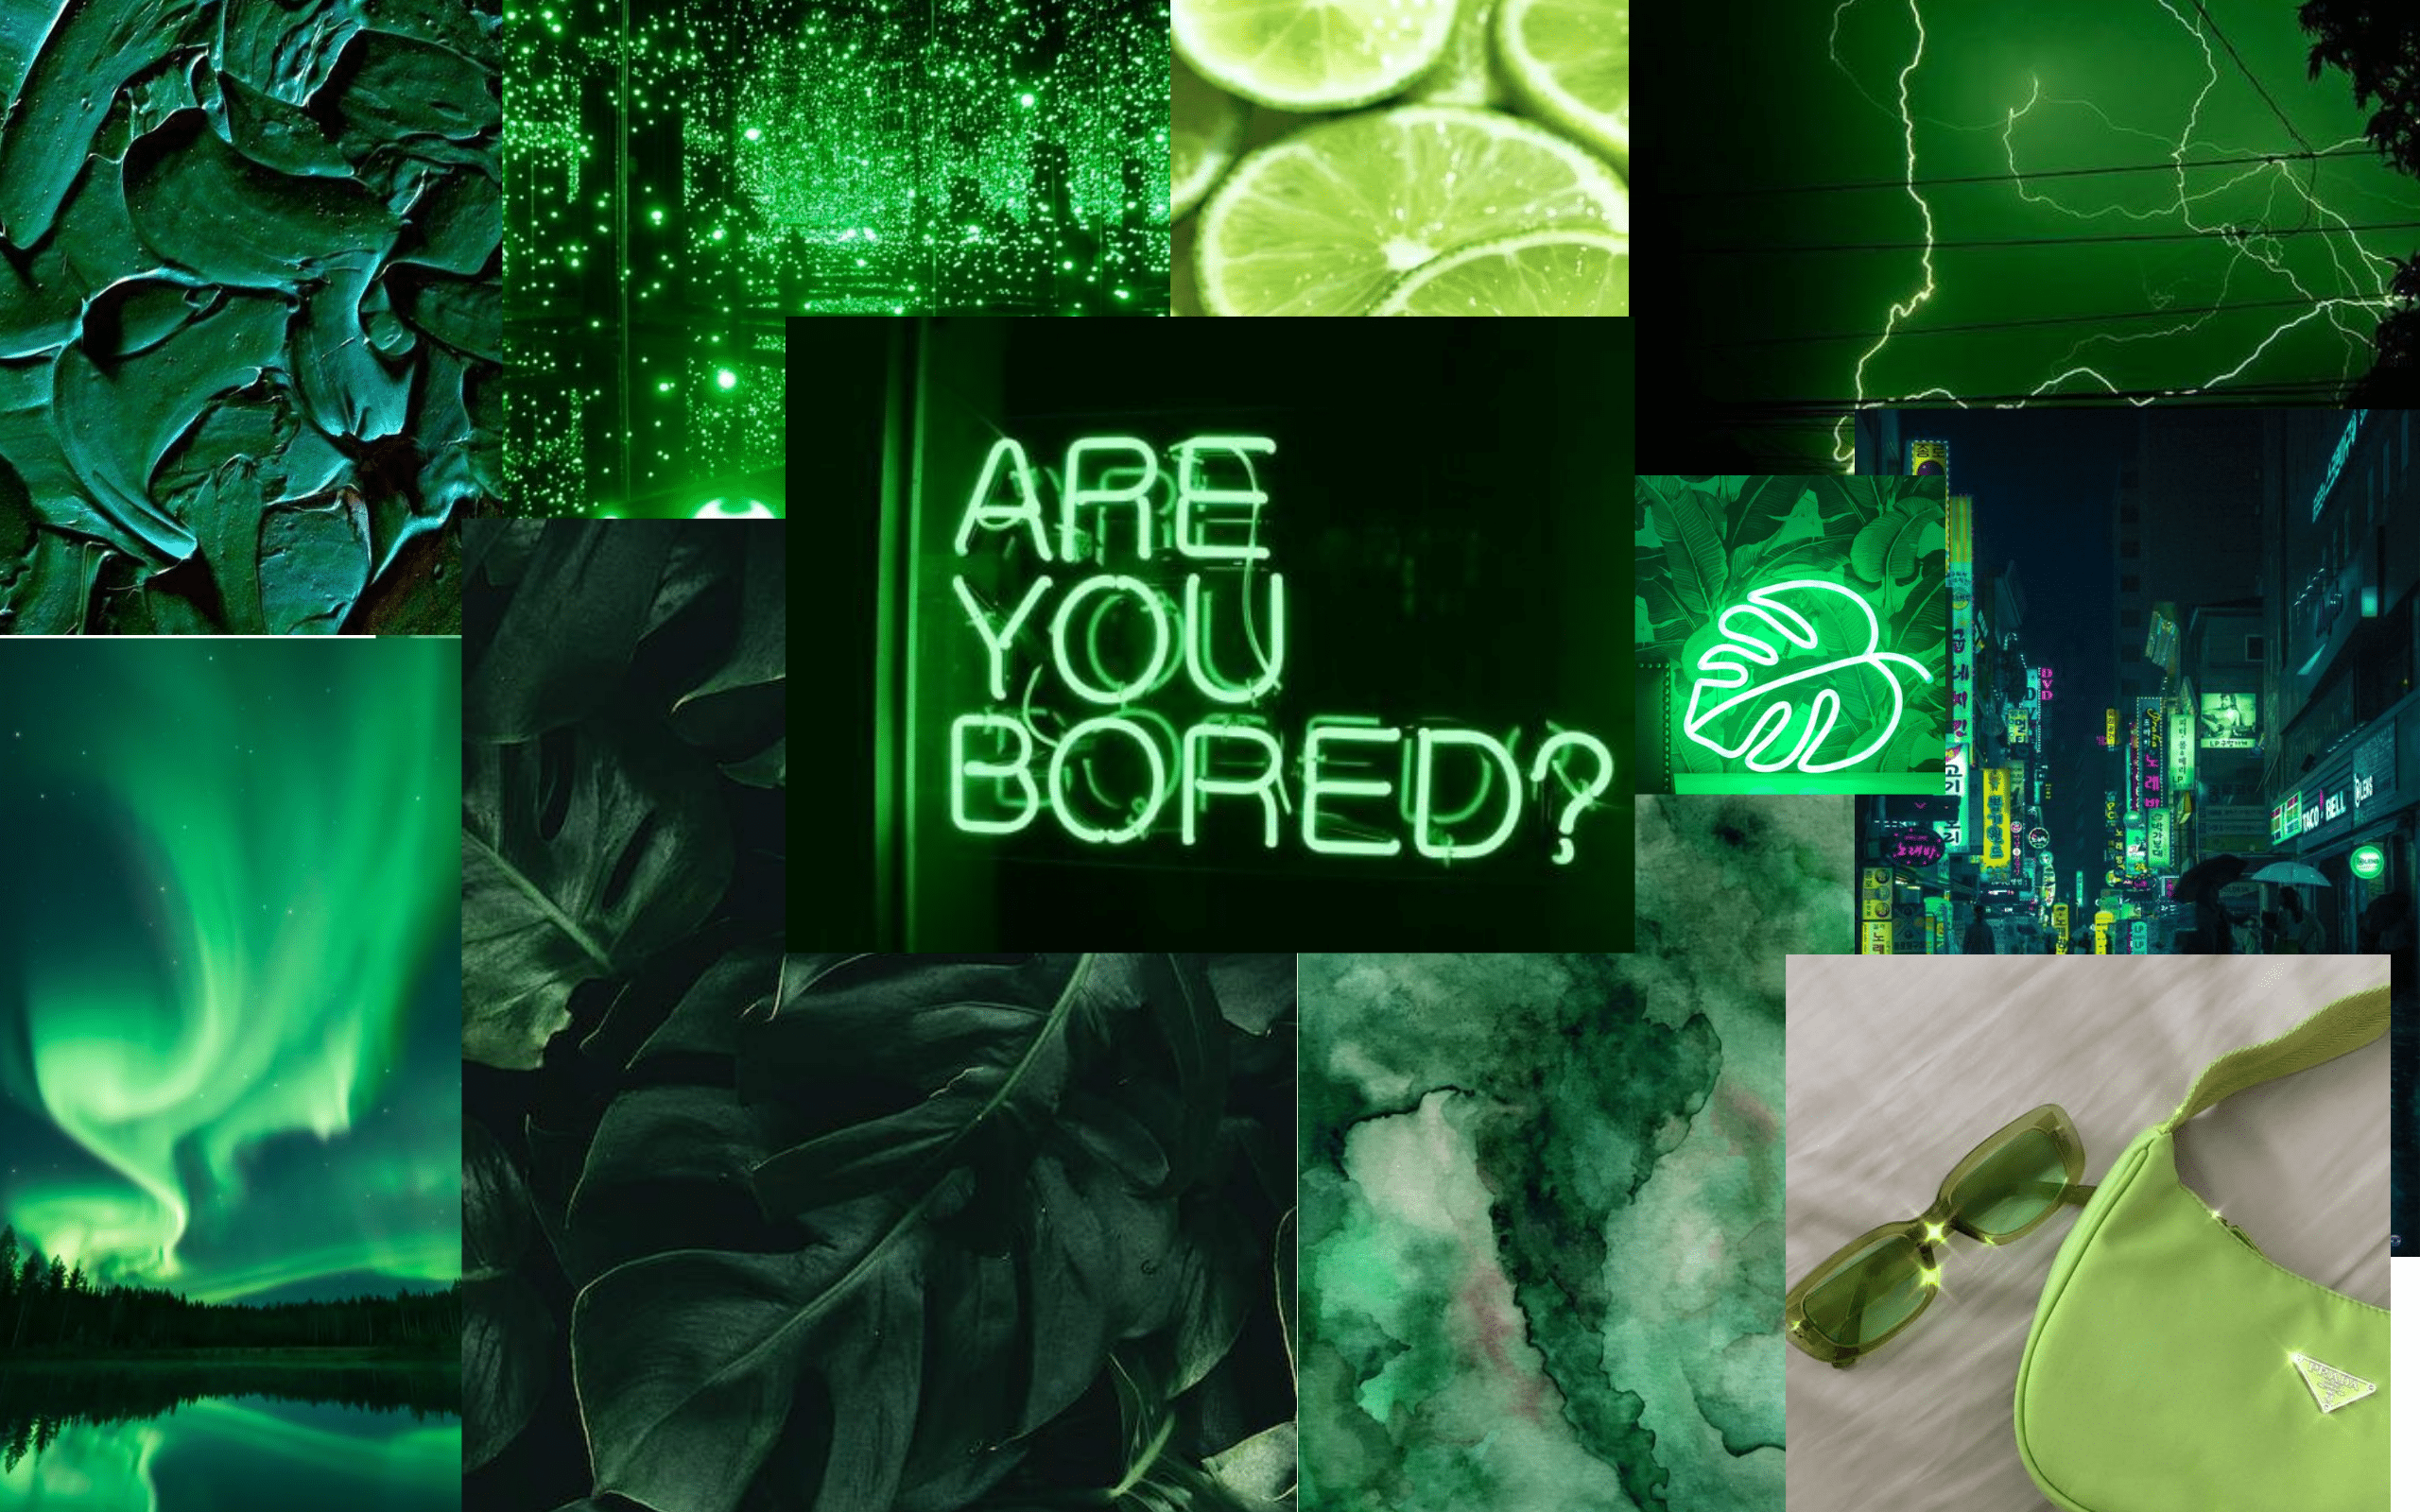 A collage of neon green aesthetic images including text that says 